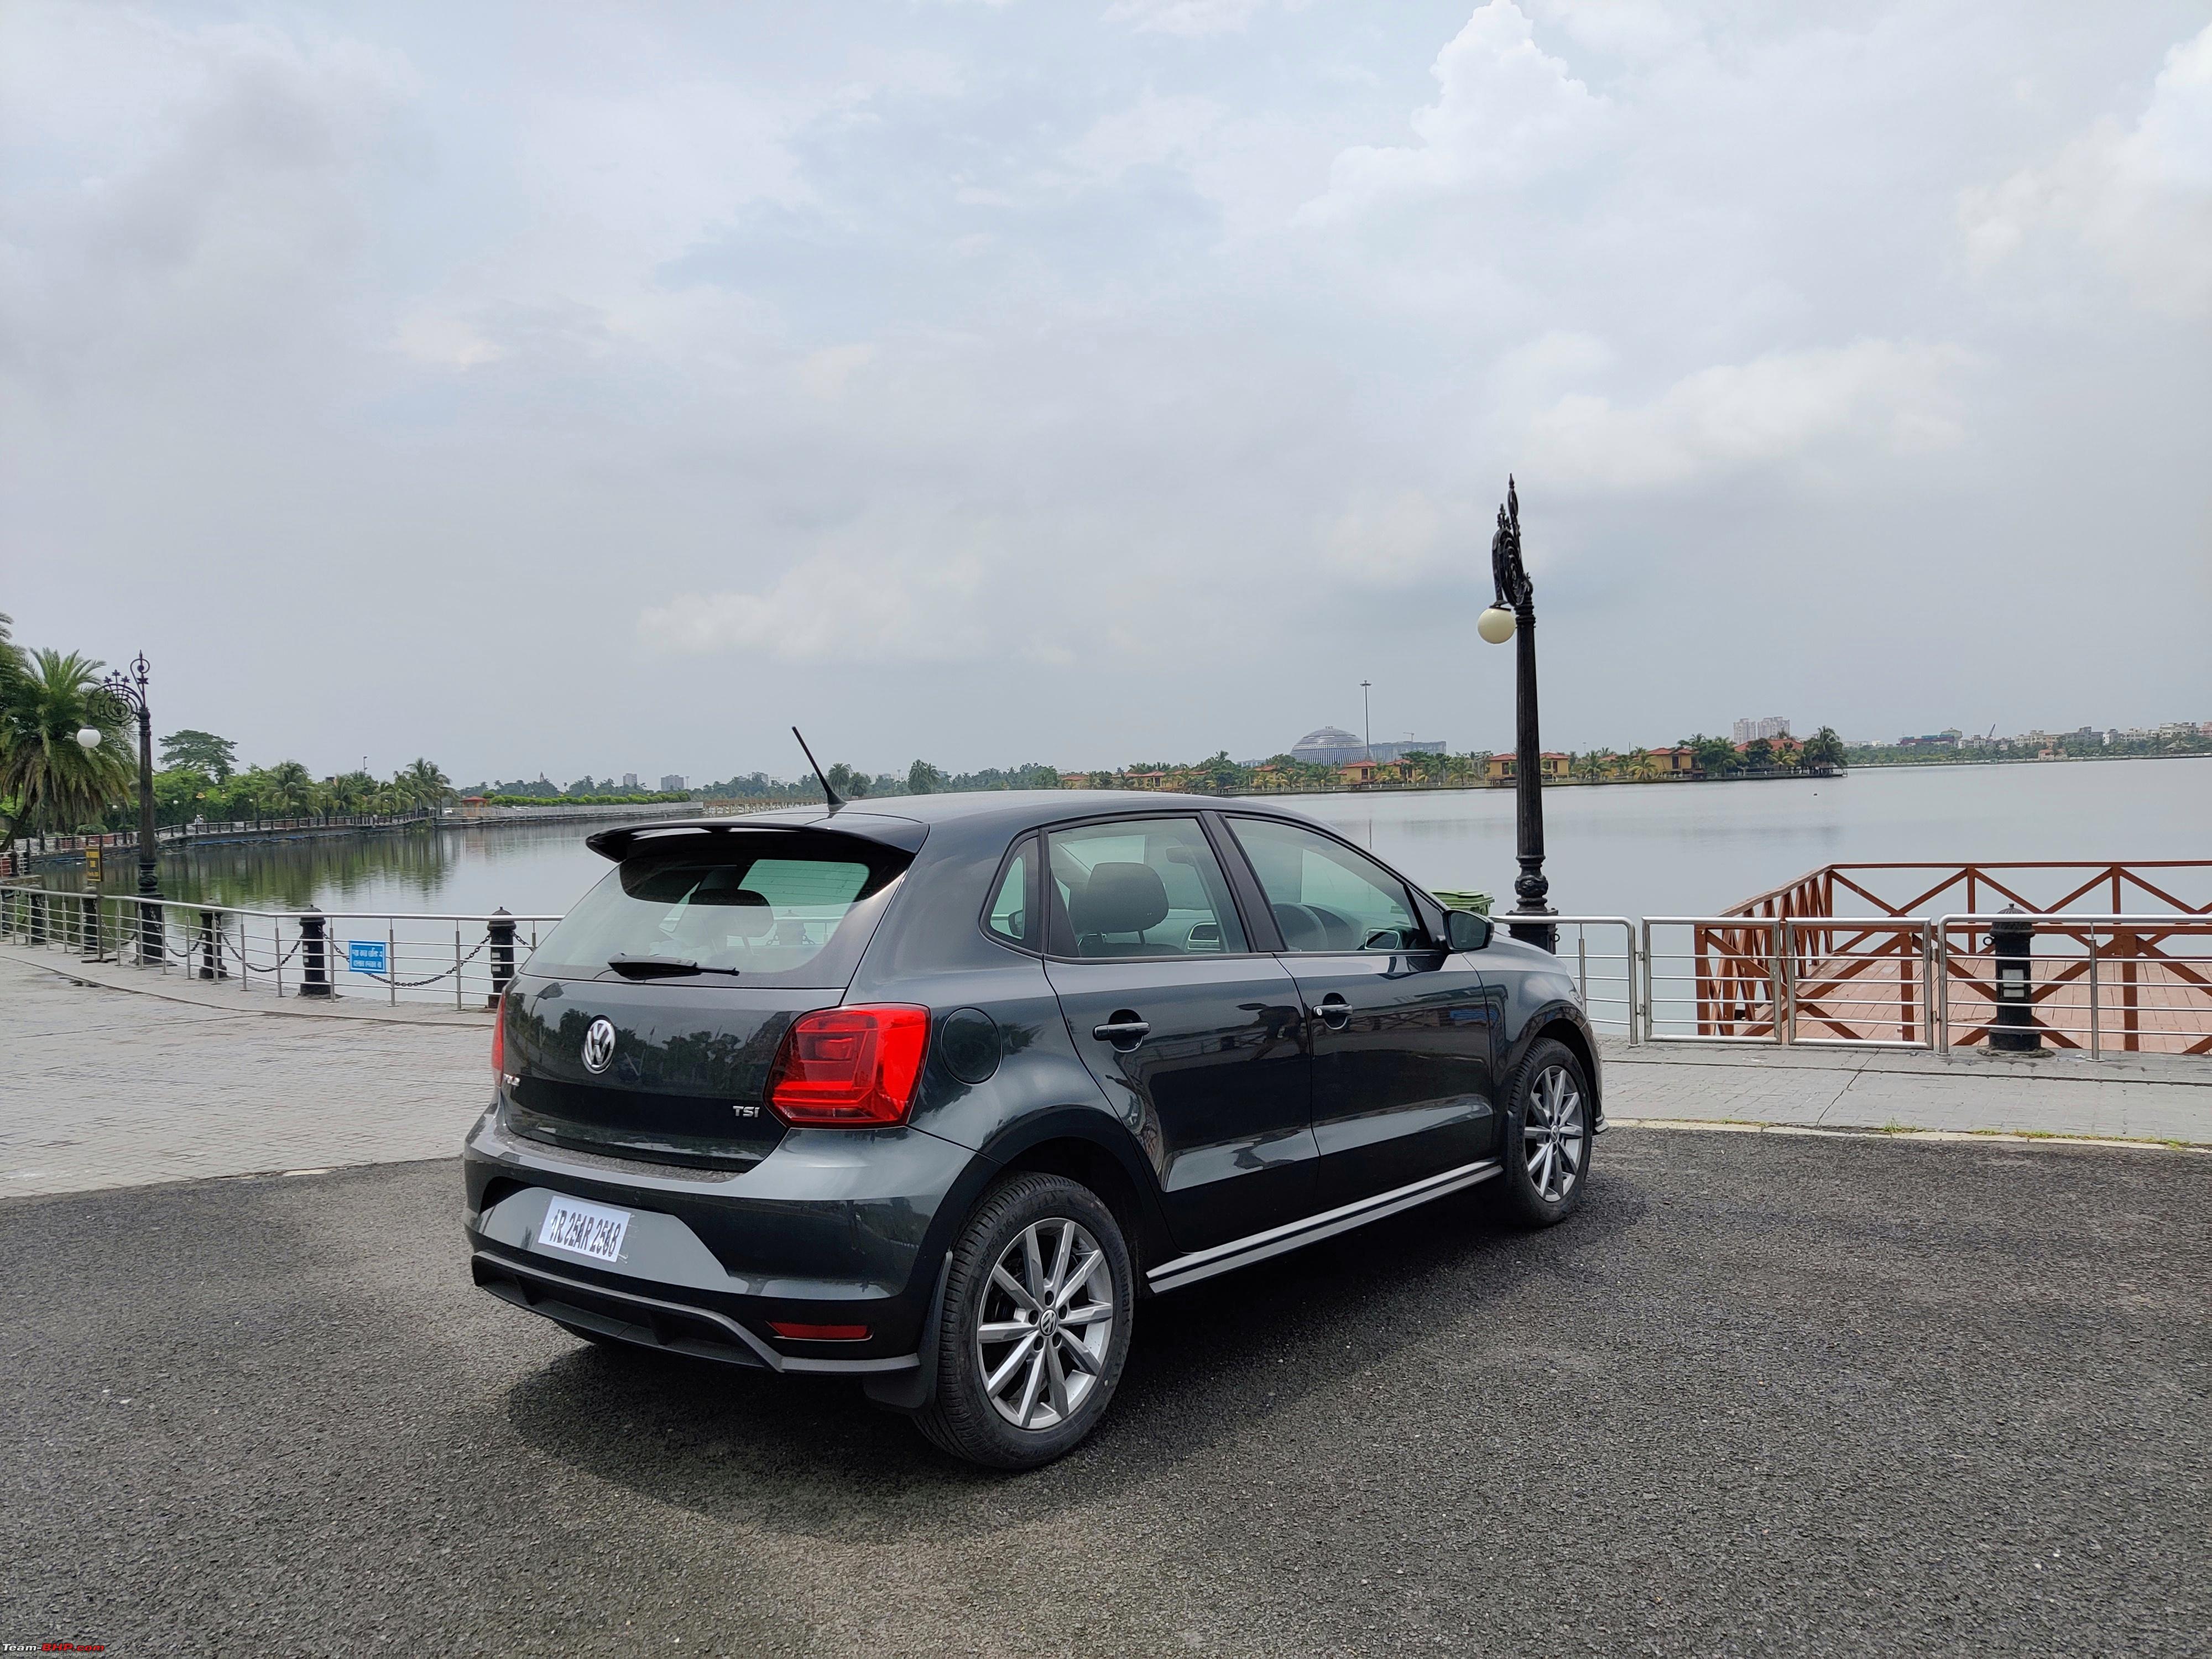 Volkswagen Polo 1.0L TSI : Official Review - Page 41 - Team-BHP